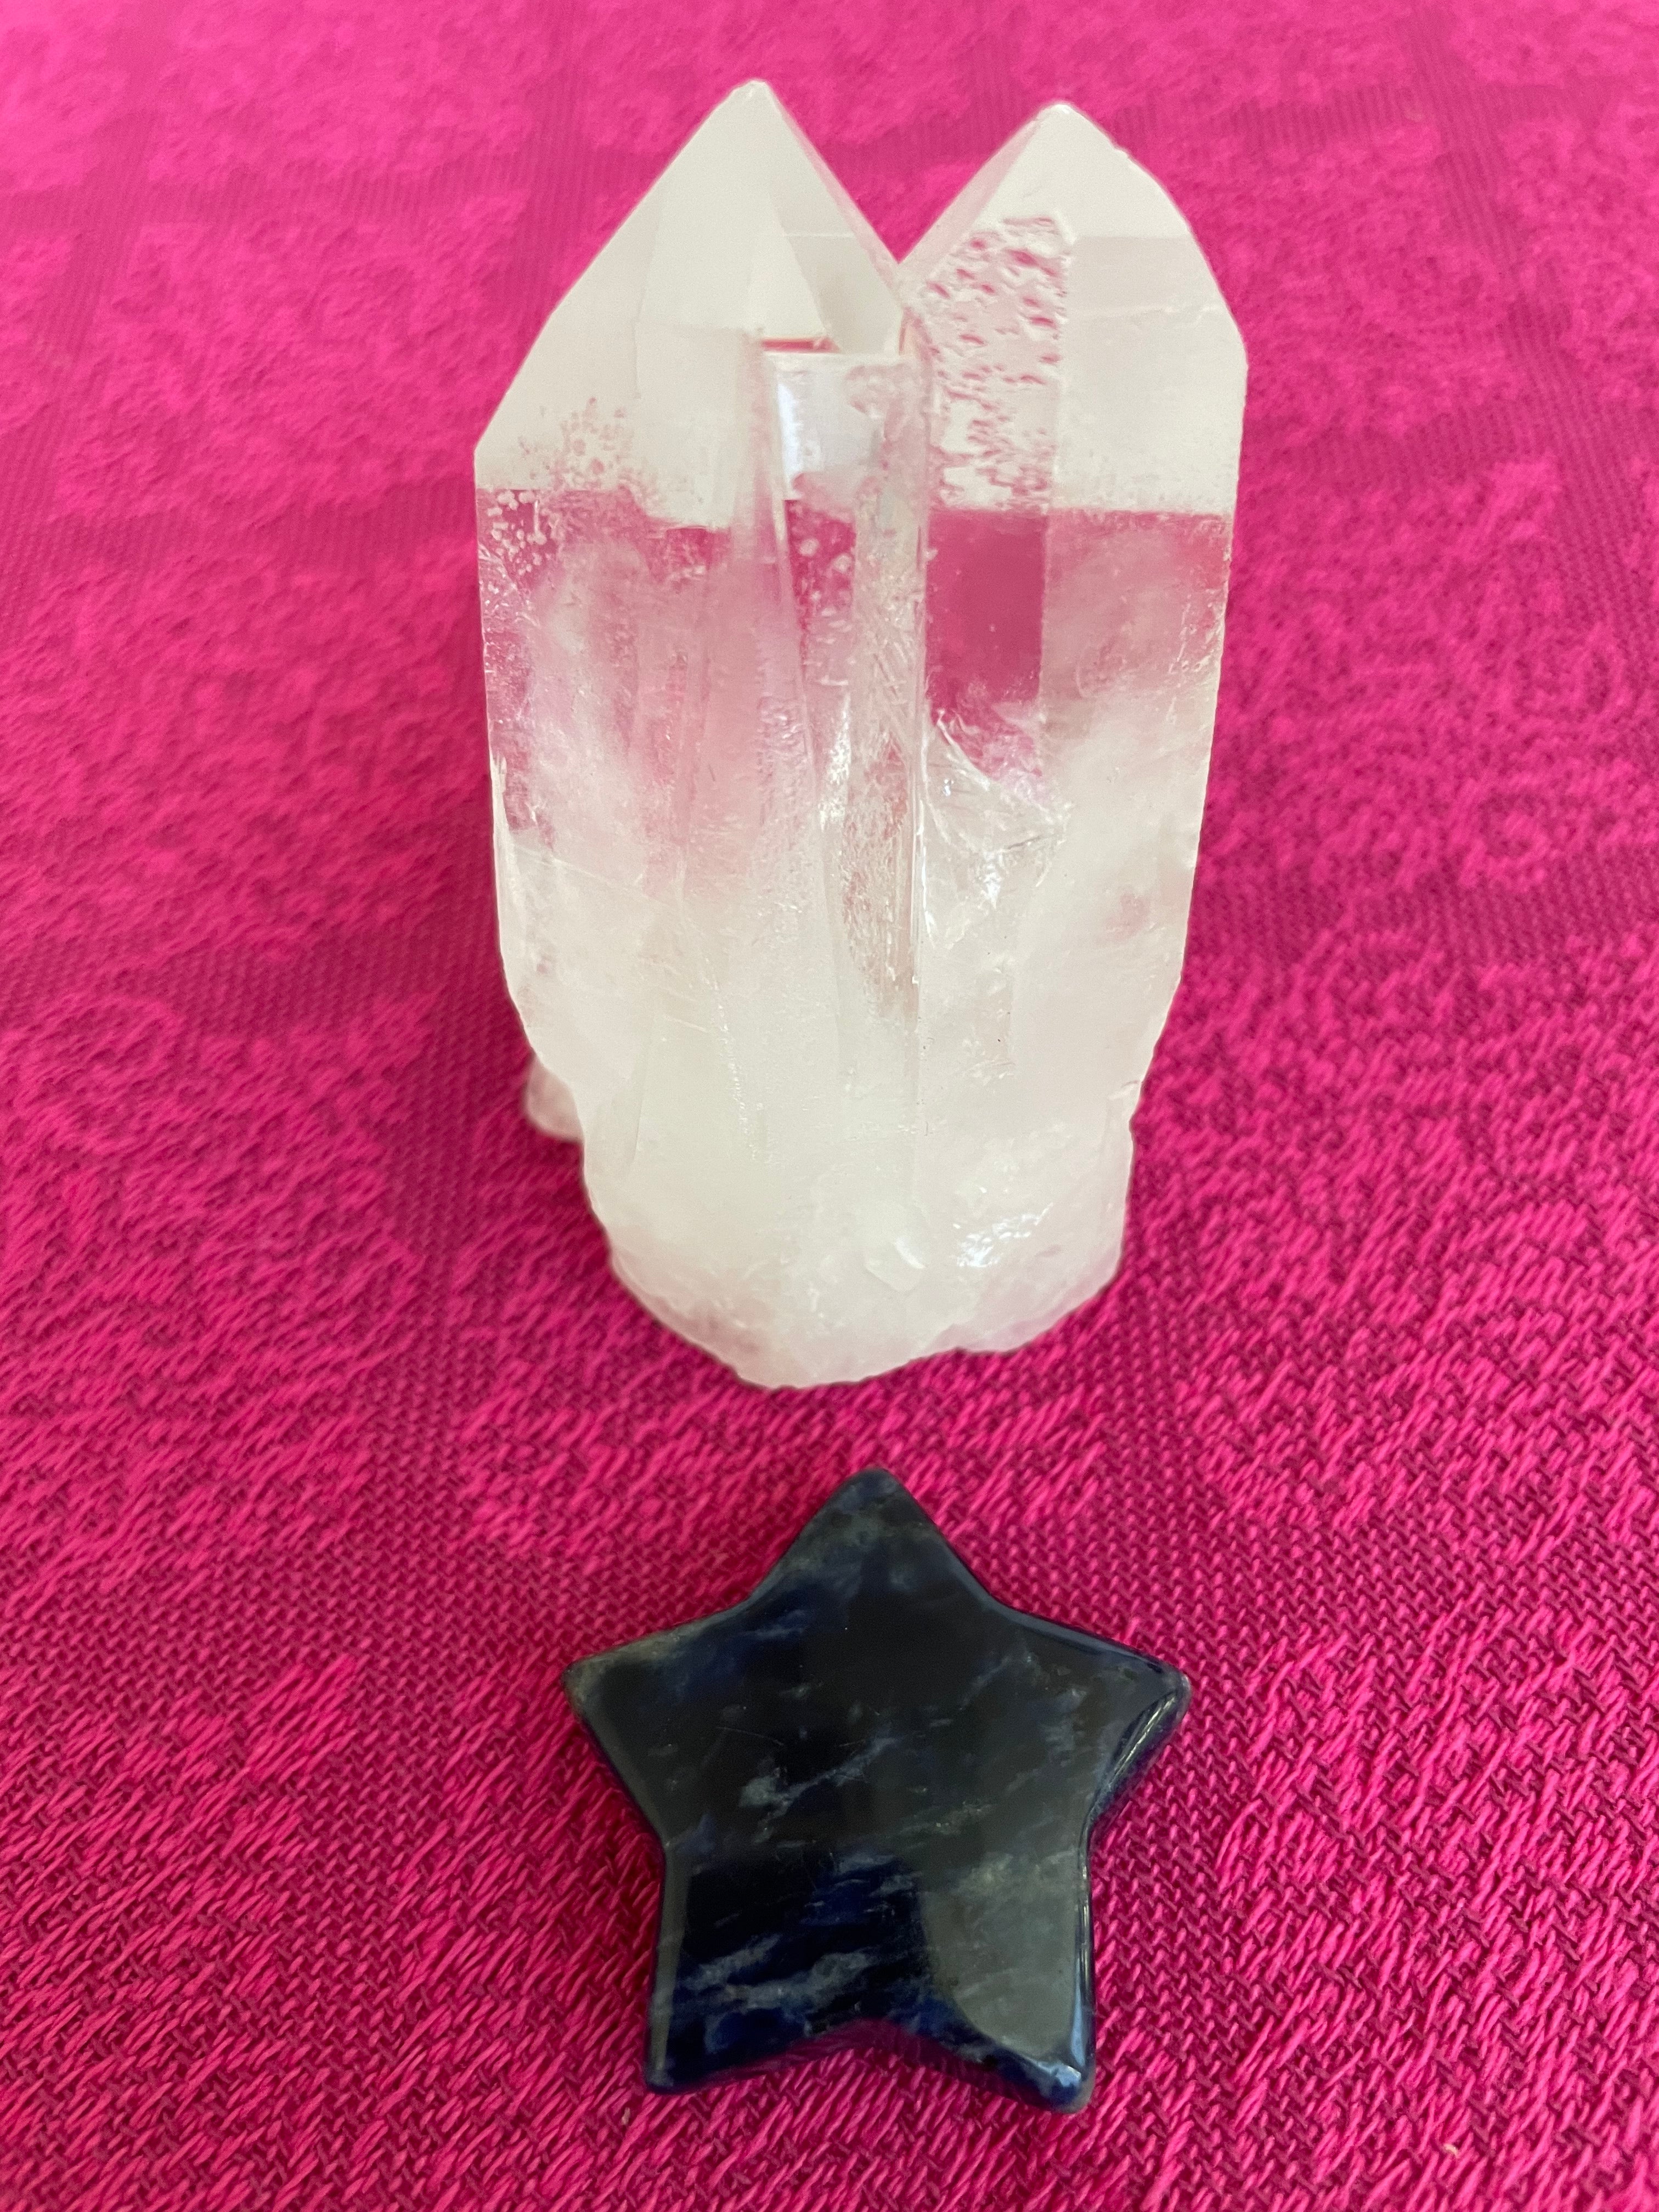 This powerful little sodalite crystal star can be used for meditation, healing, as an altar piece or as décor for any room in your home or office. Makes a wonderful gift too! Easy to slip right into your pocket so you can take the energy of sodalite wherever you go! Sodalite "Unites logic with intuition and opens spiritual perception" (Judy Hall). Approx. 1¼". Cost is $6.  